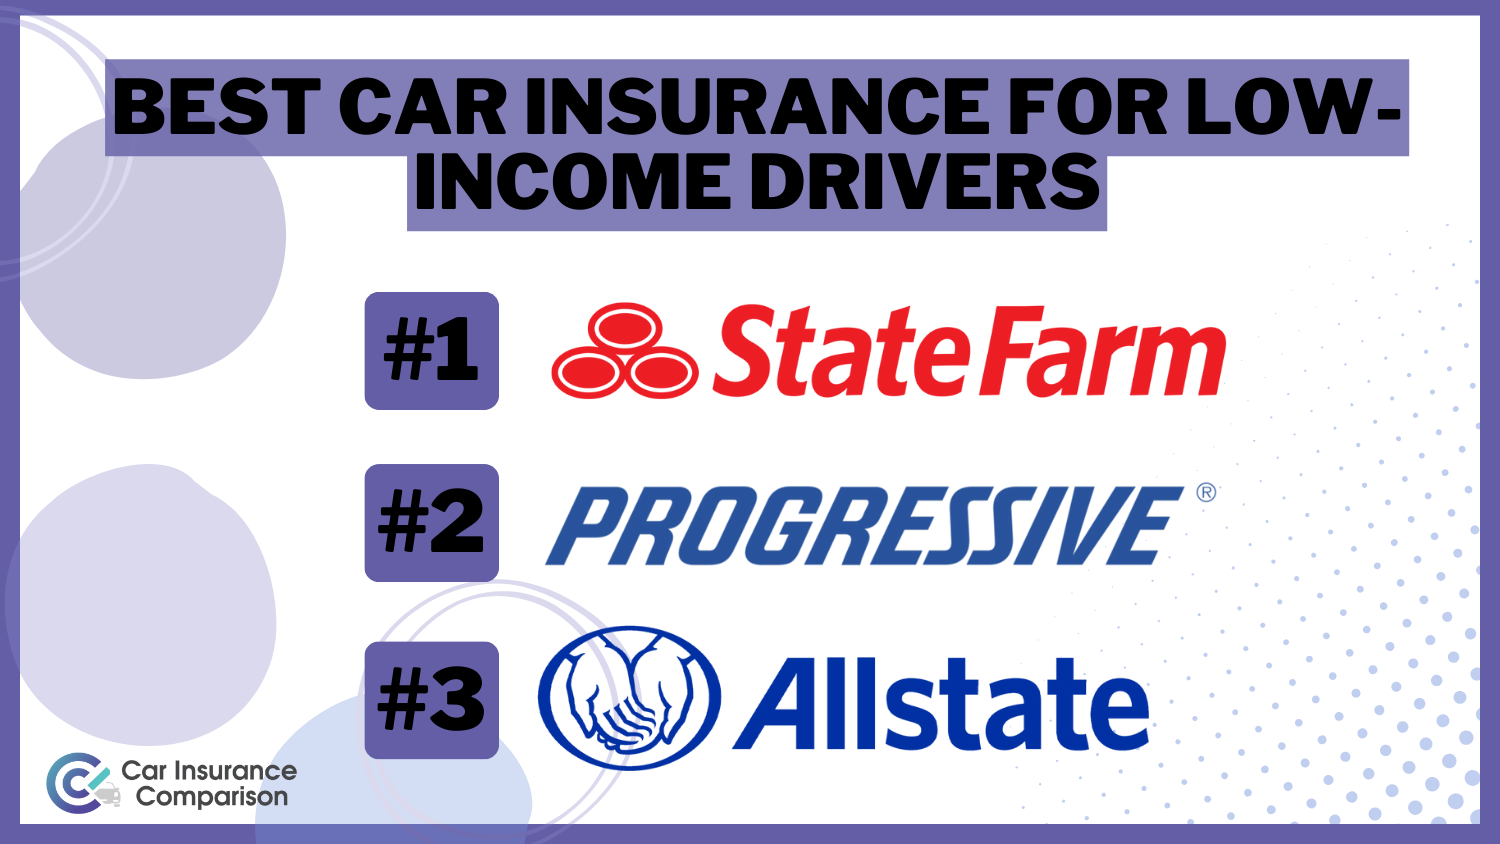 3 Best Car Insurance for Low-Income Drivers: State Farm, Progressive and Allstate